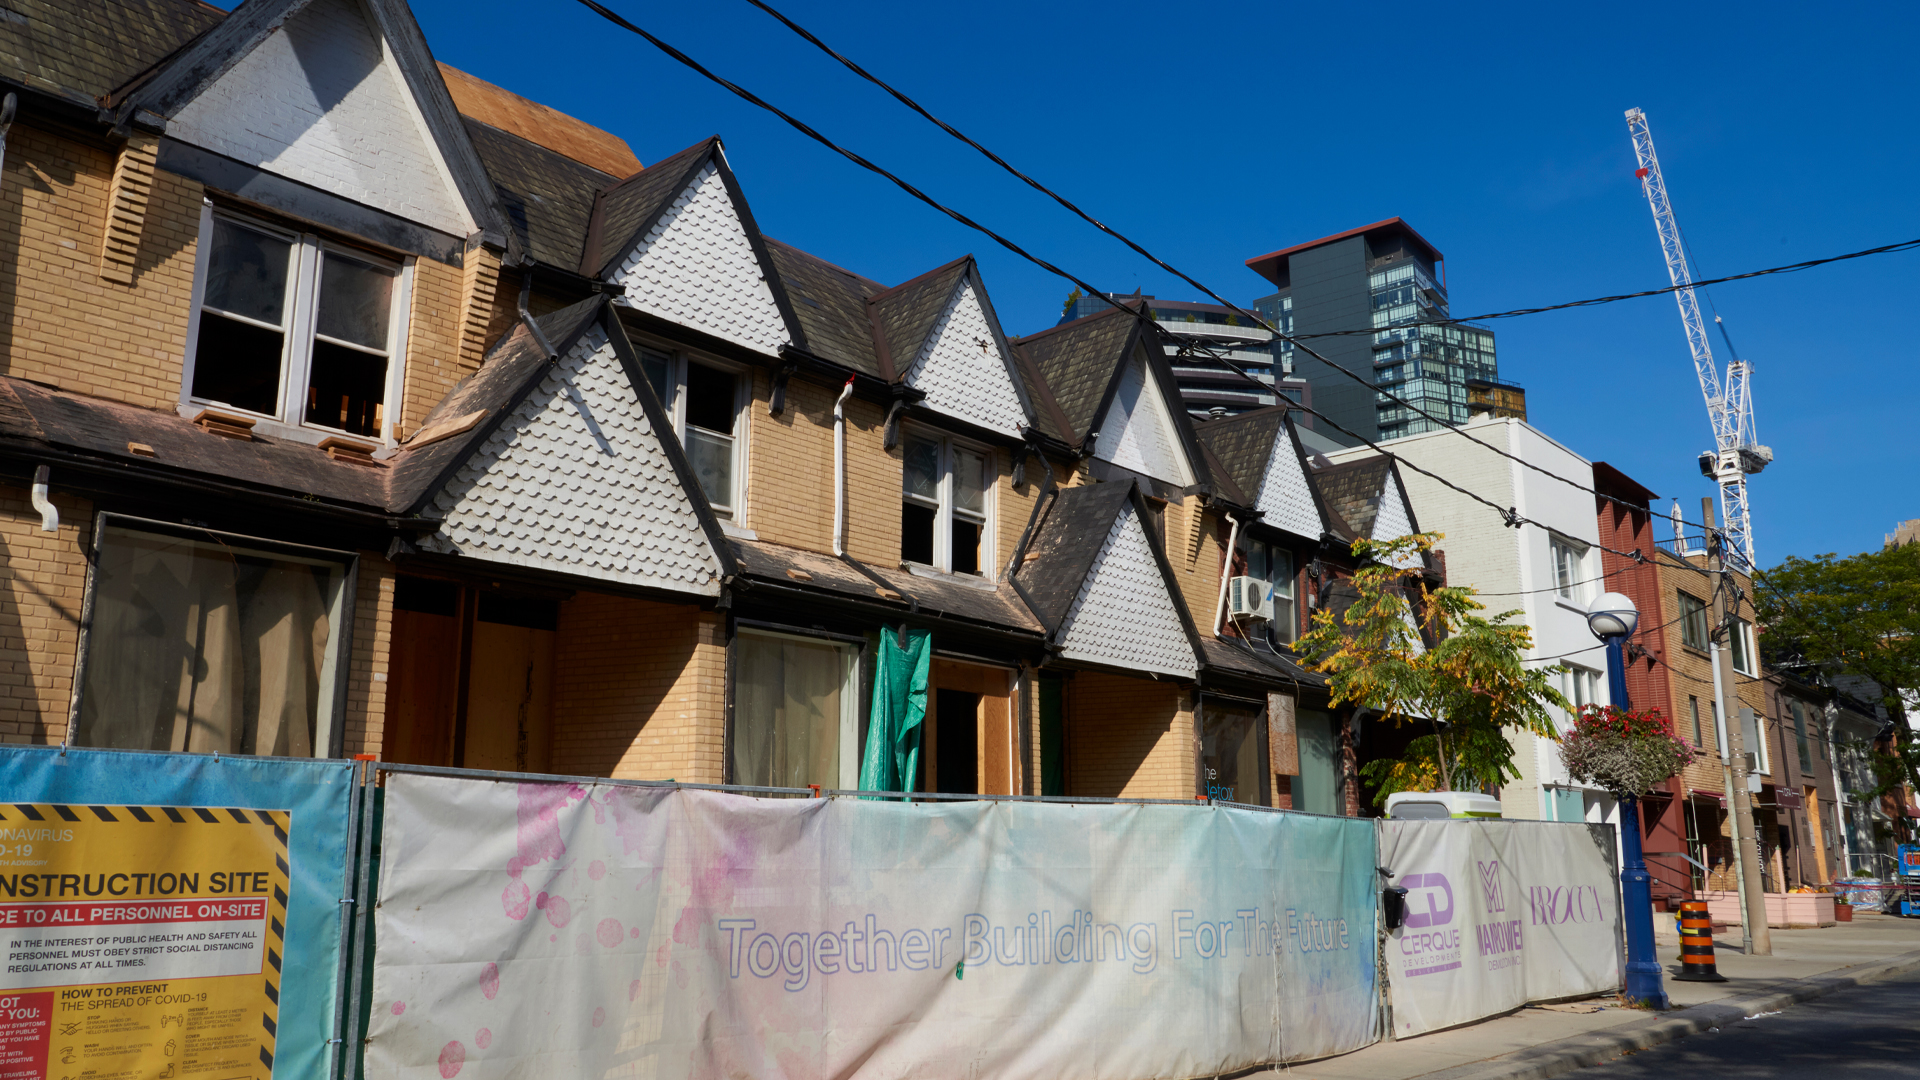 How does Canada fix the housing crisis?